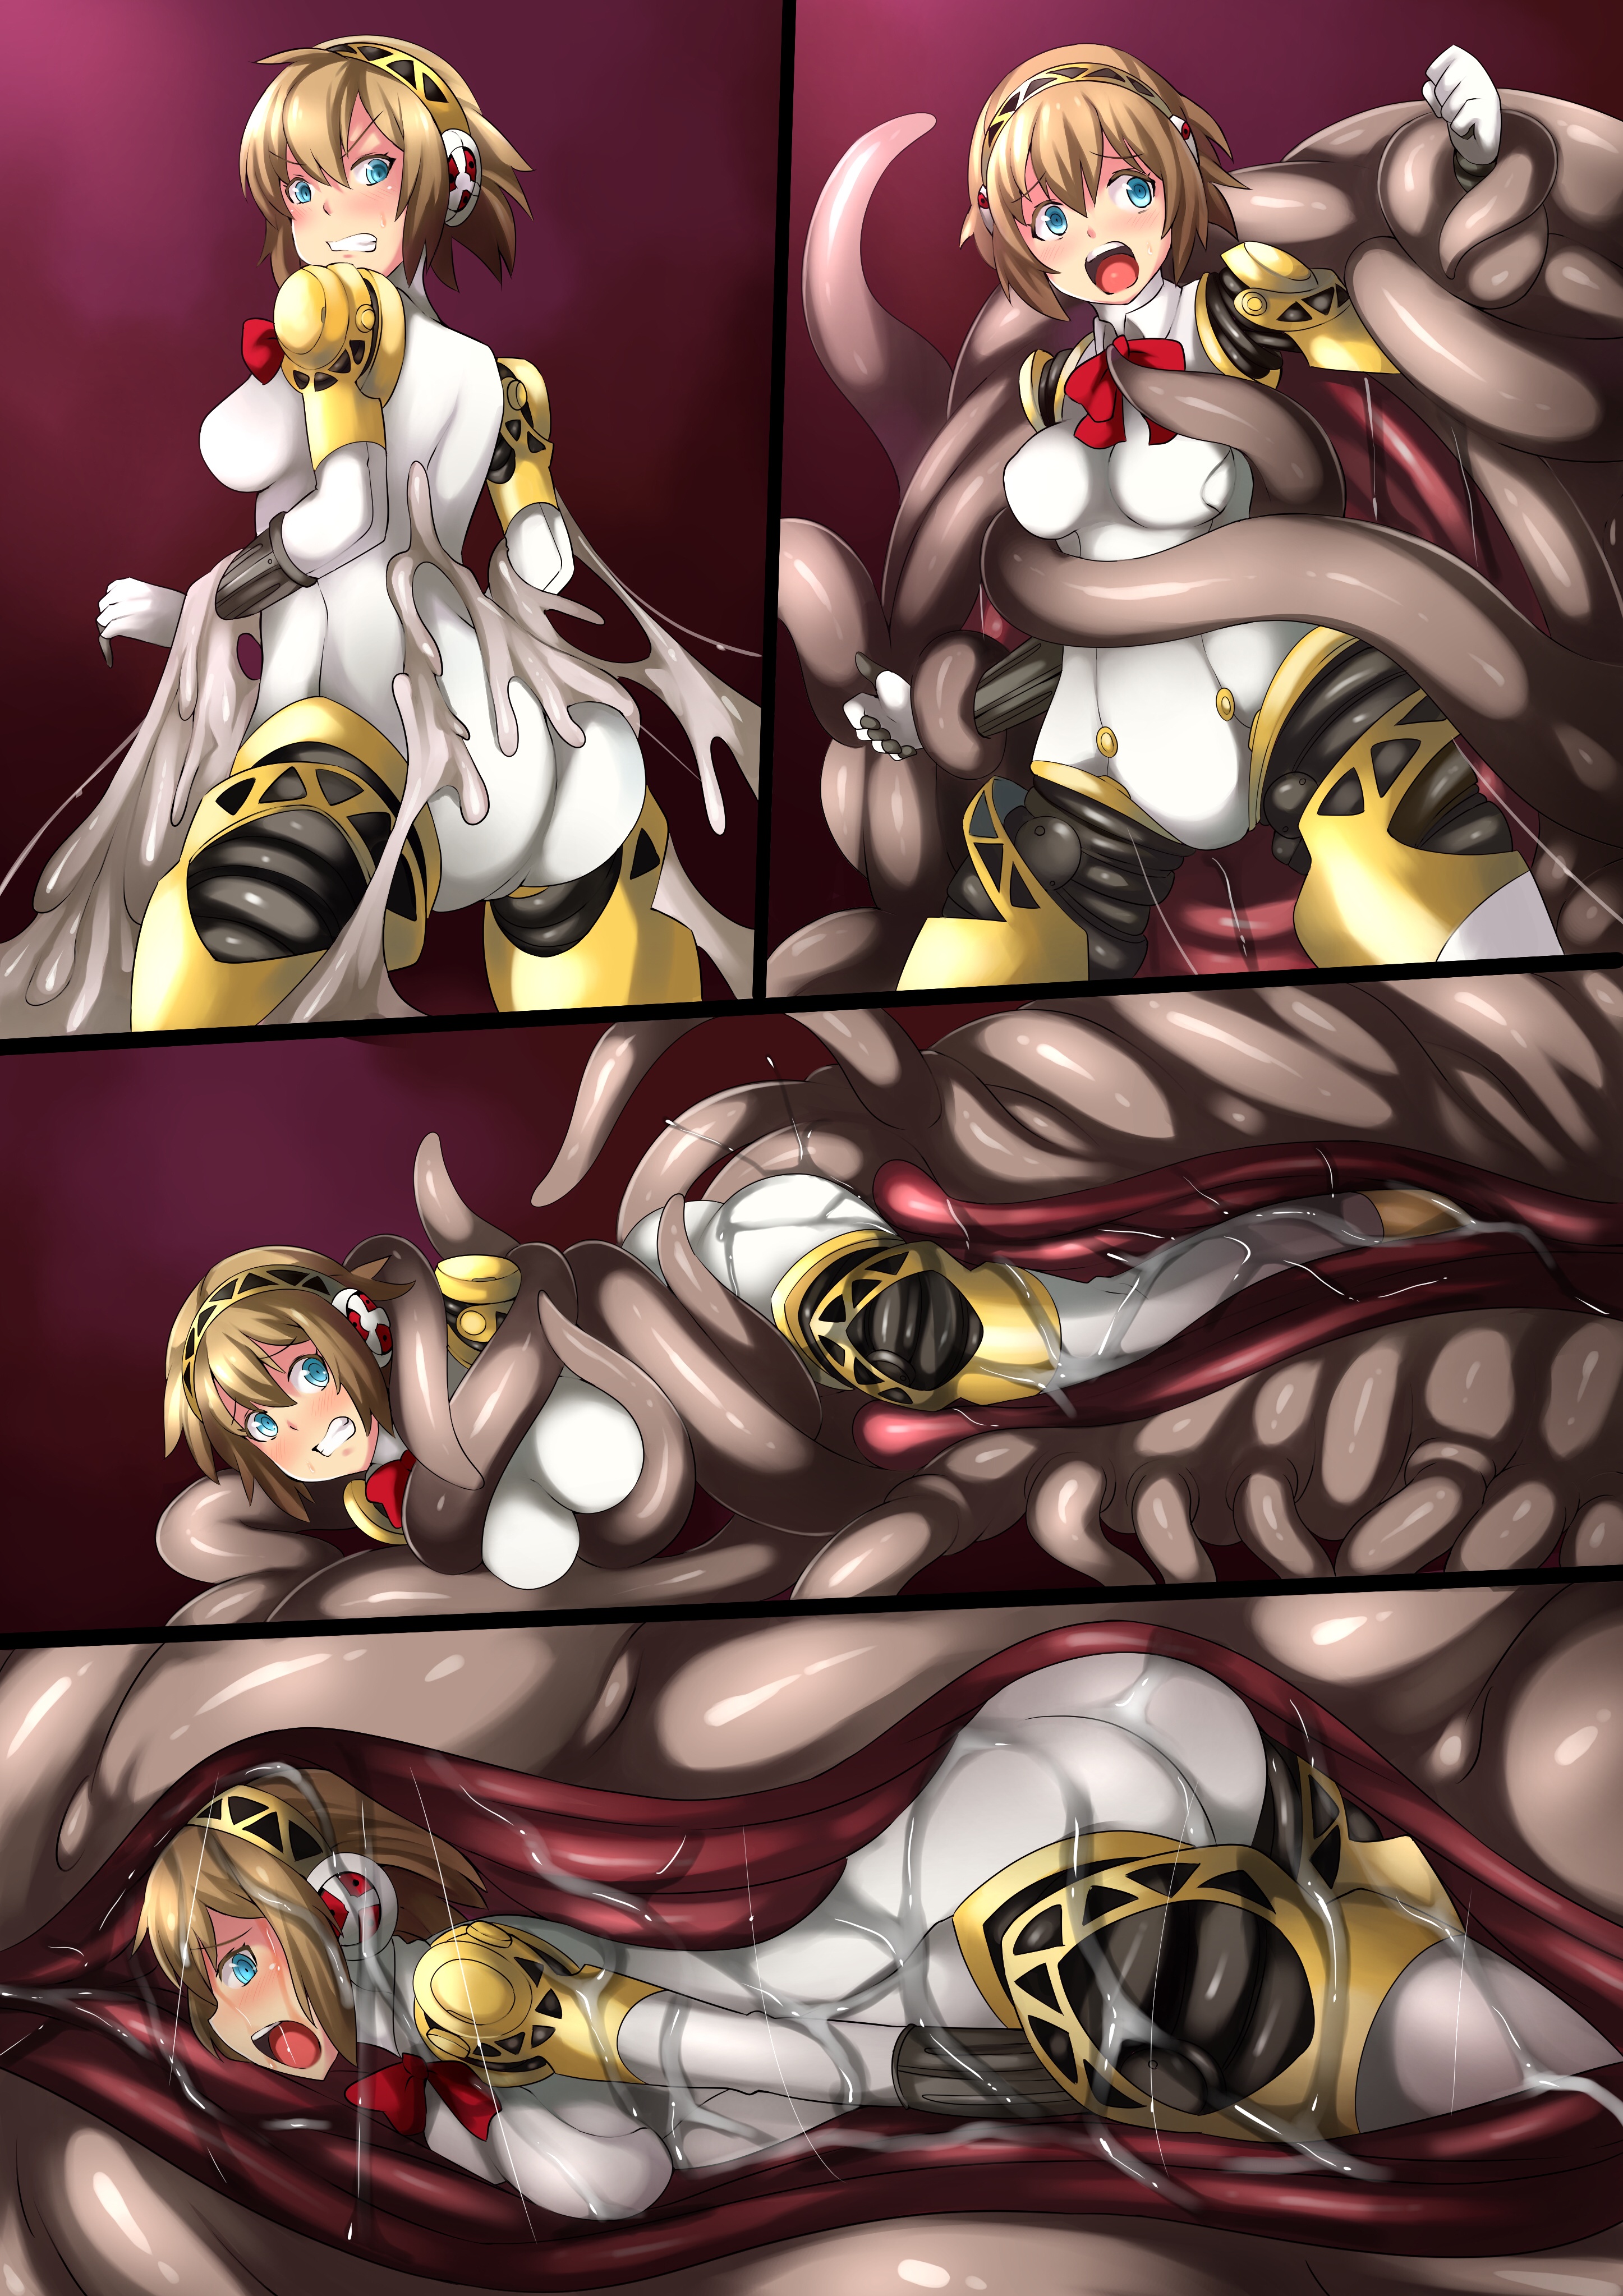 Aigis's Sticky situation by Arniro111